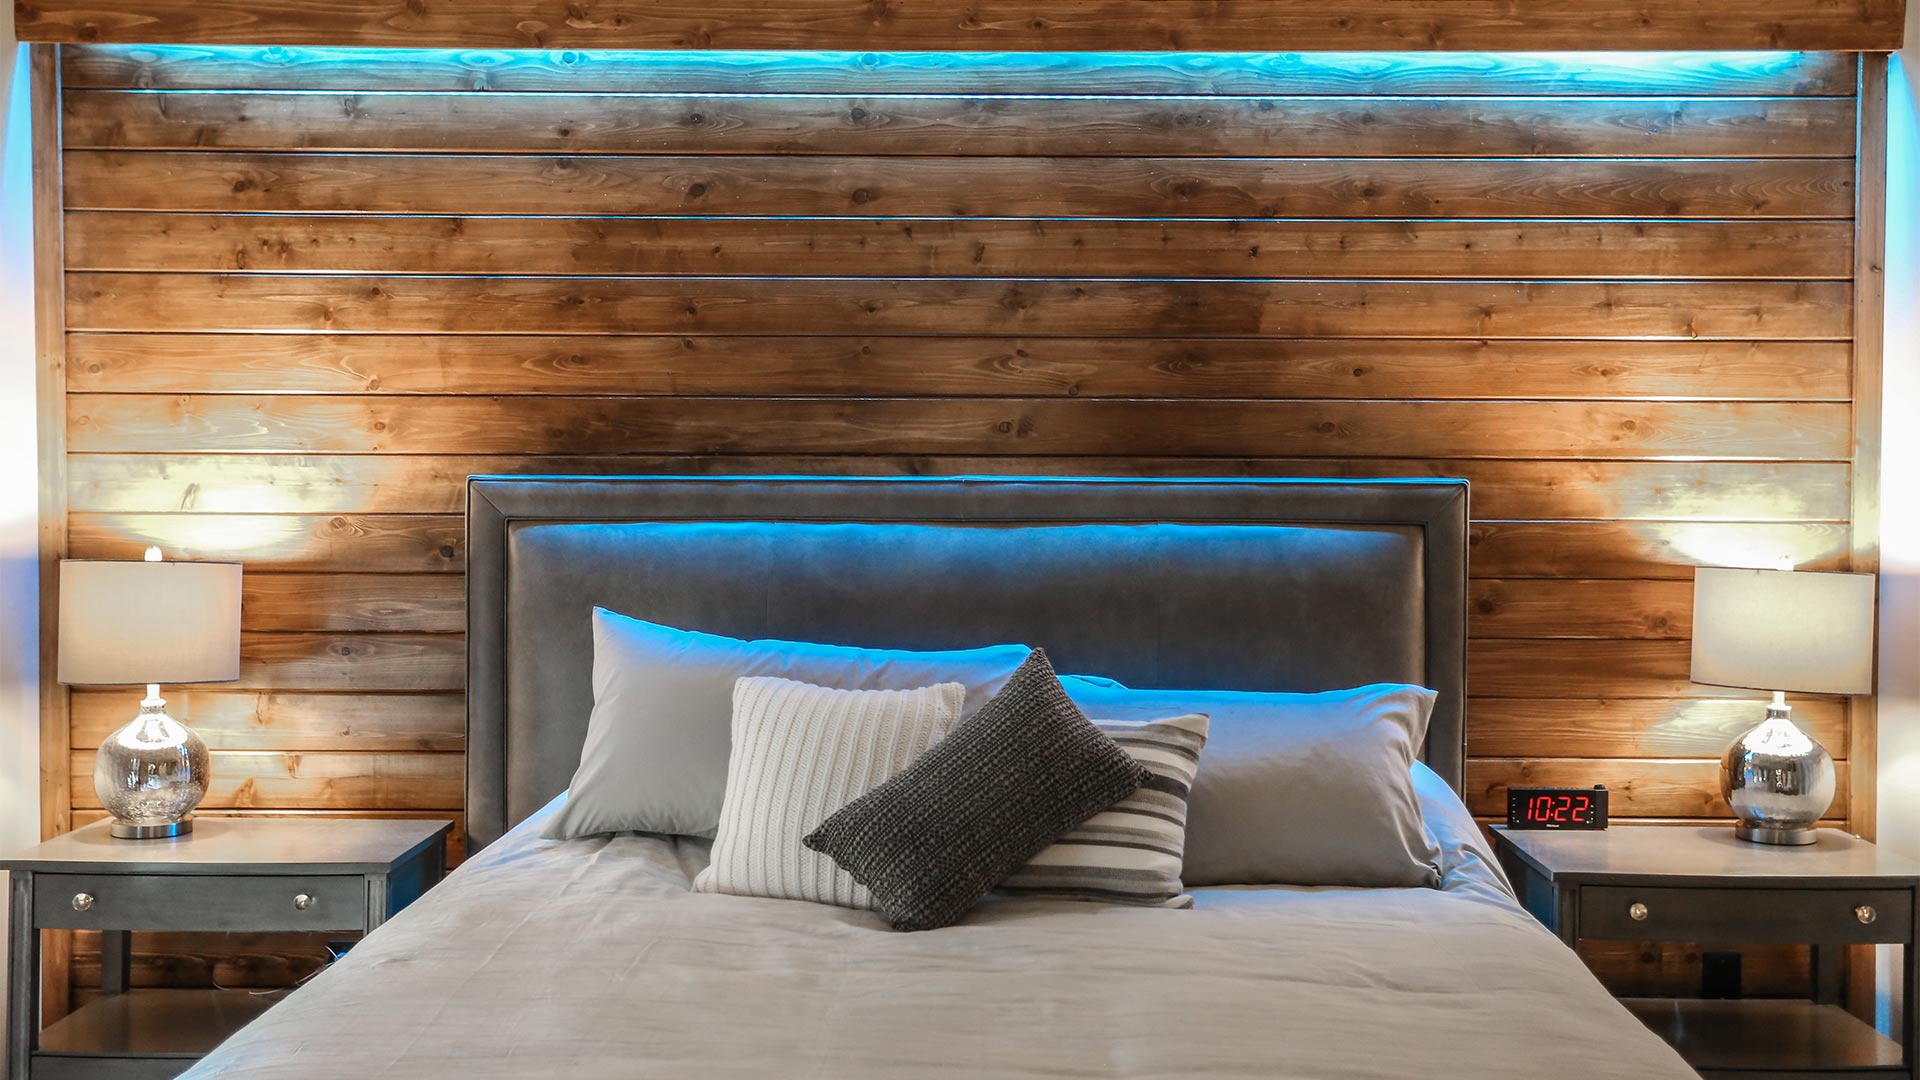 detail shot of a bedroom. There is calming blue mood lighting above the bed. The bed is neutral tones of gray. The wall behind the bed is a dark wood.